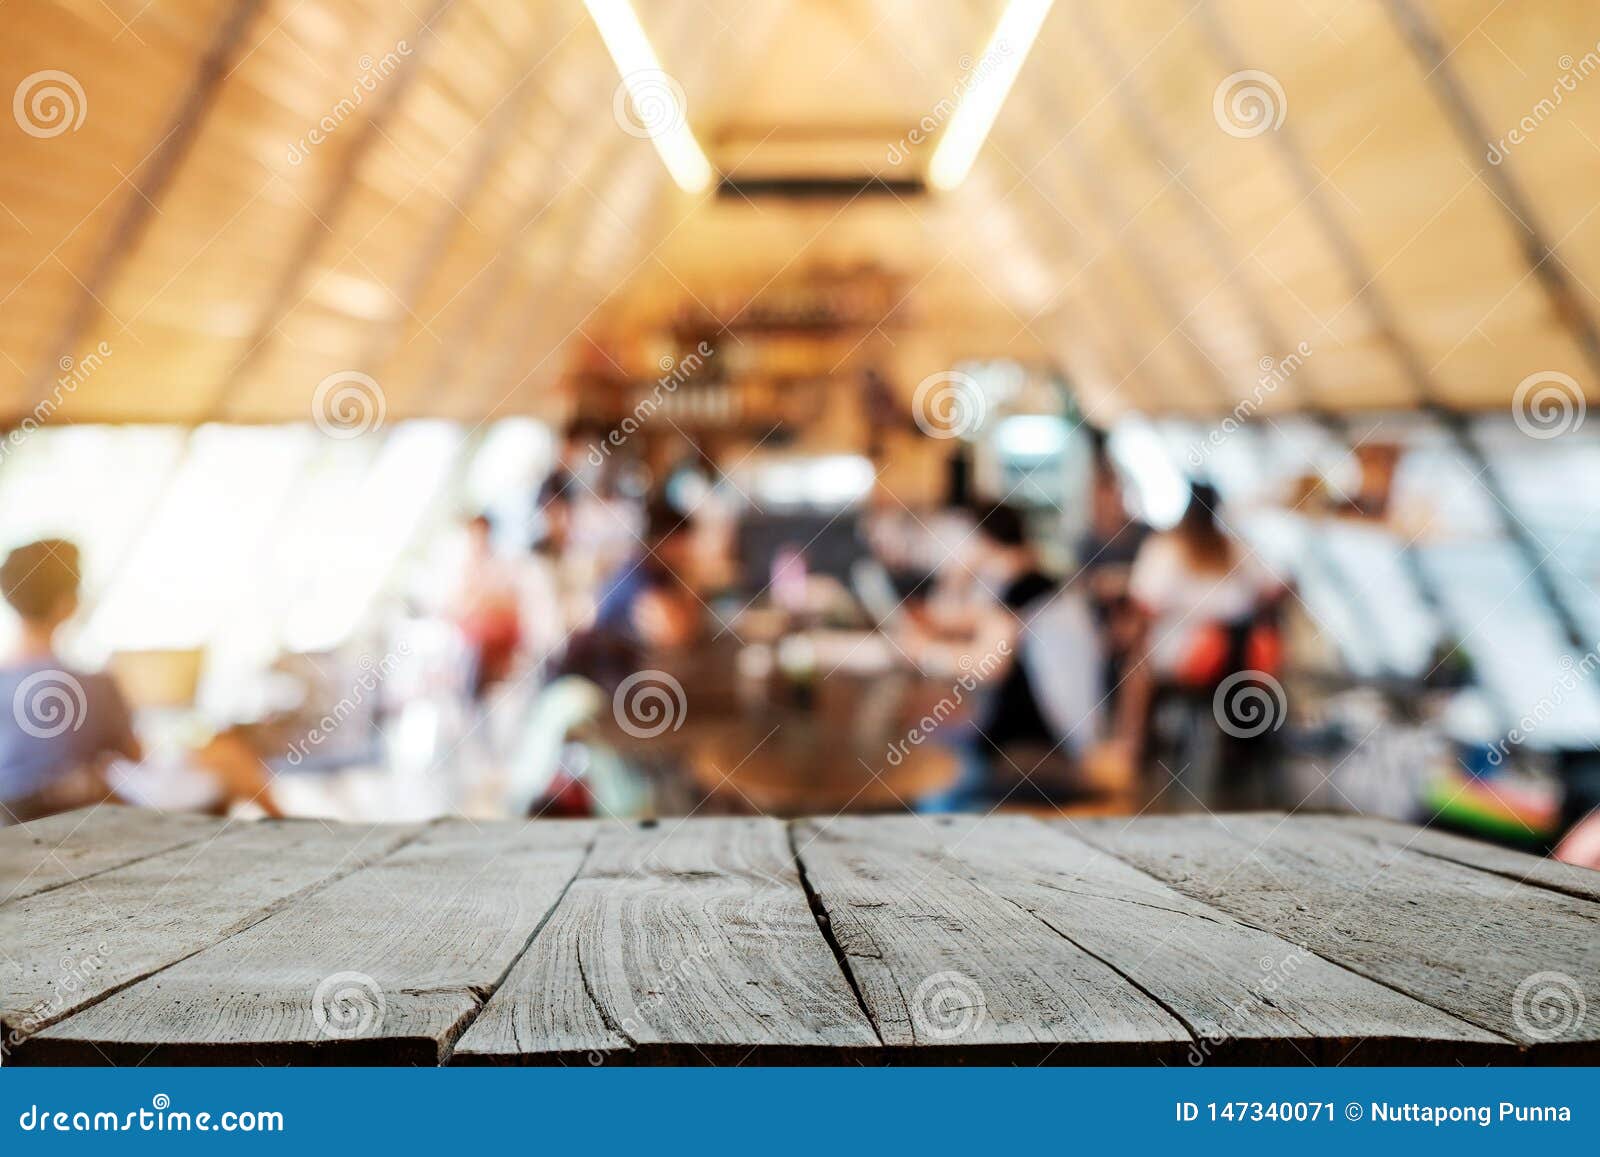 Empty Top Of Wooden Shelves Desk Wood Space Stock Image Image Of